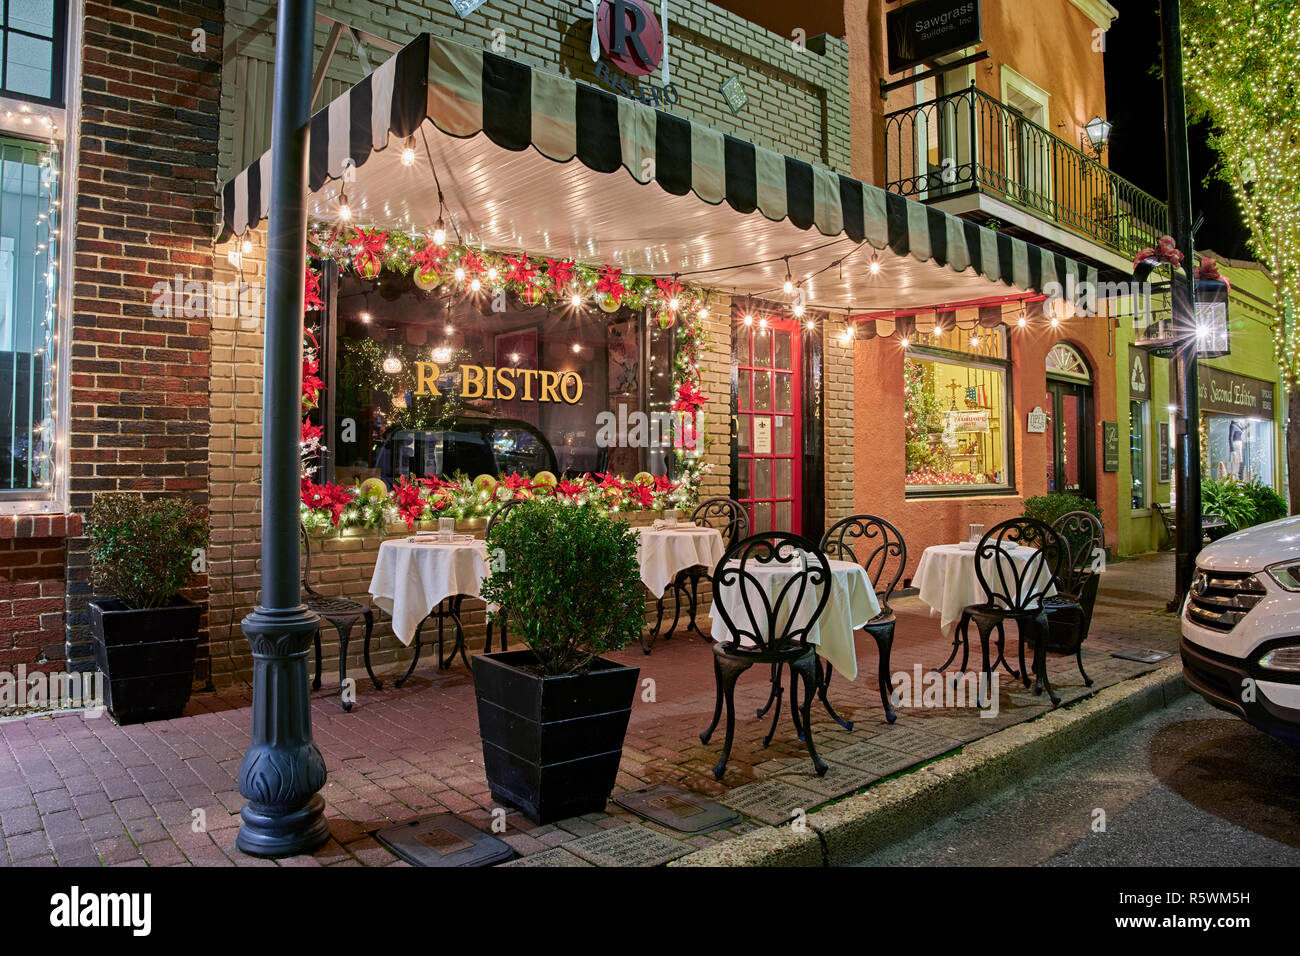 R Bistro upscale boutique restaurant front exterior entrance at night in Fairhope Alabama, USA. Stock Photo